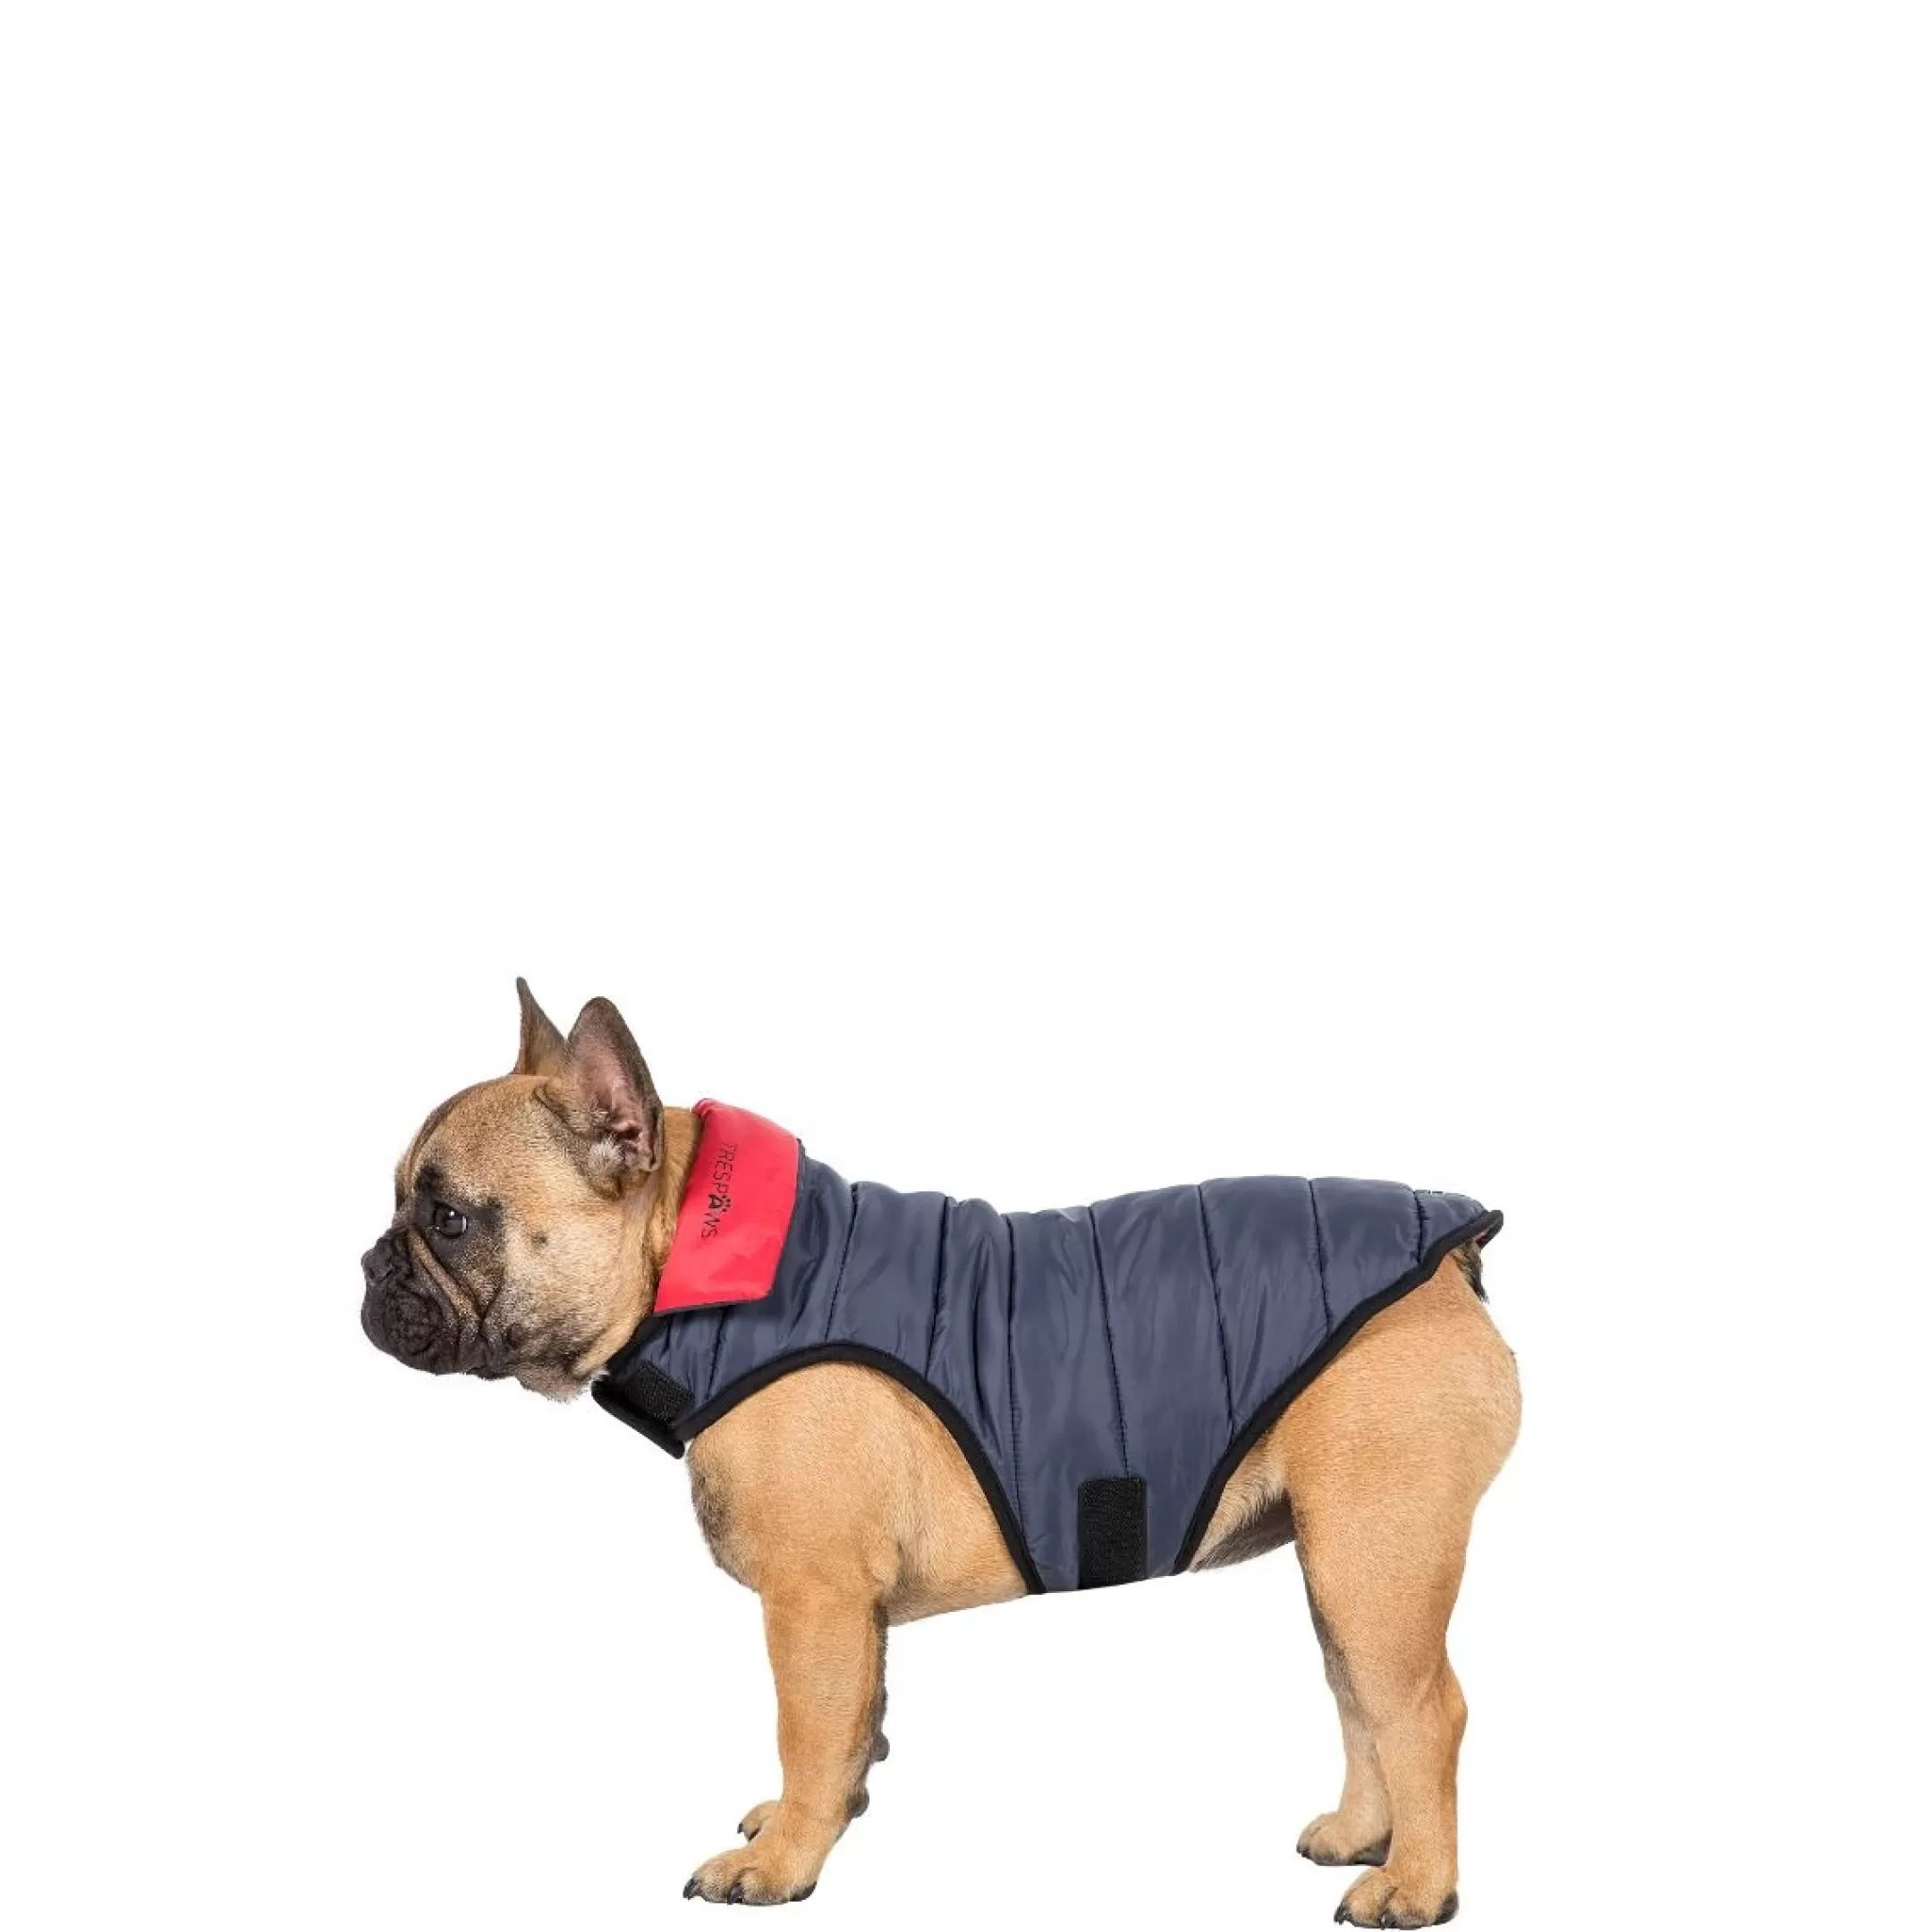 Trespaws Small Quilted Reversible Packaway Dog Jacket in Flint Kimmi | Trespass Fashion